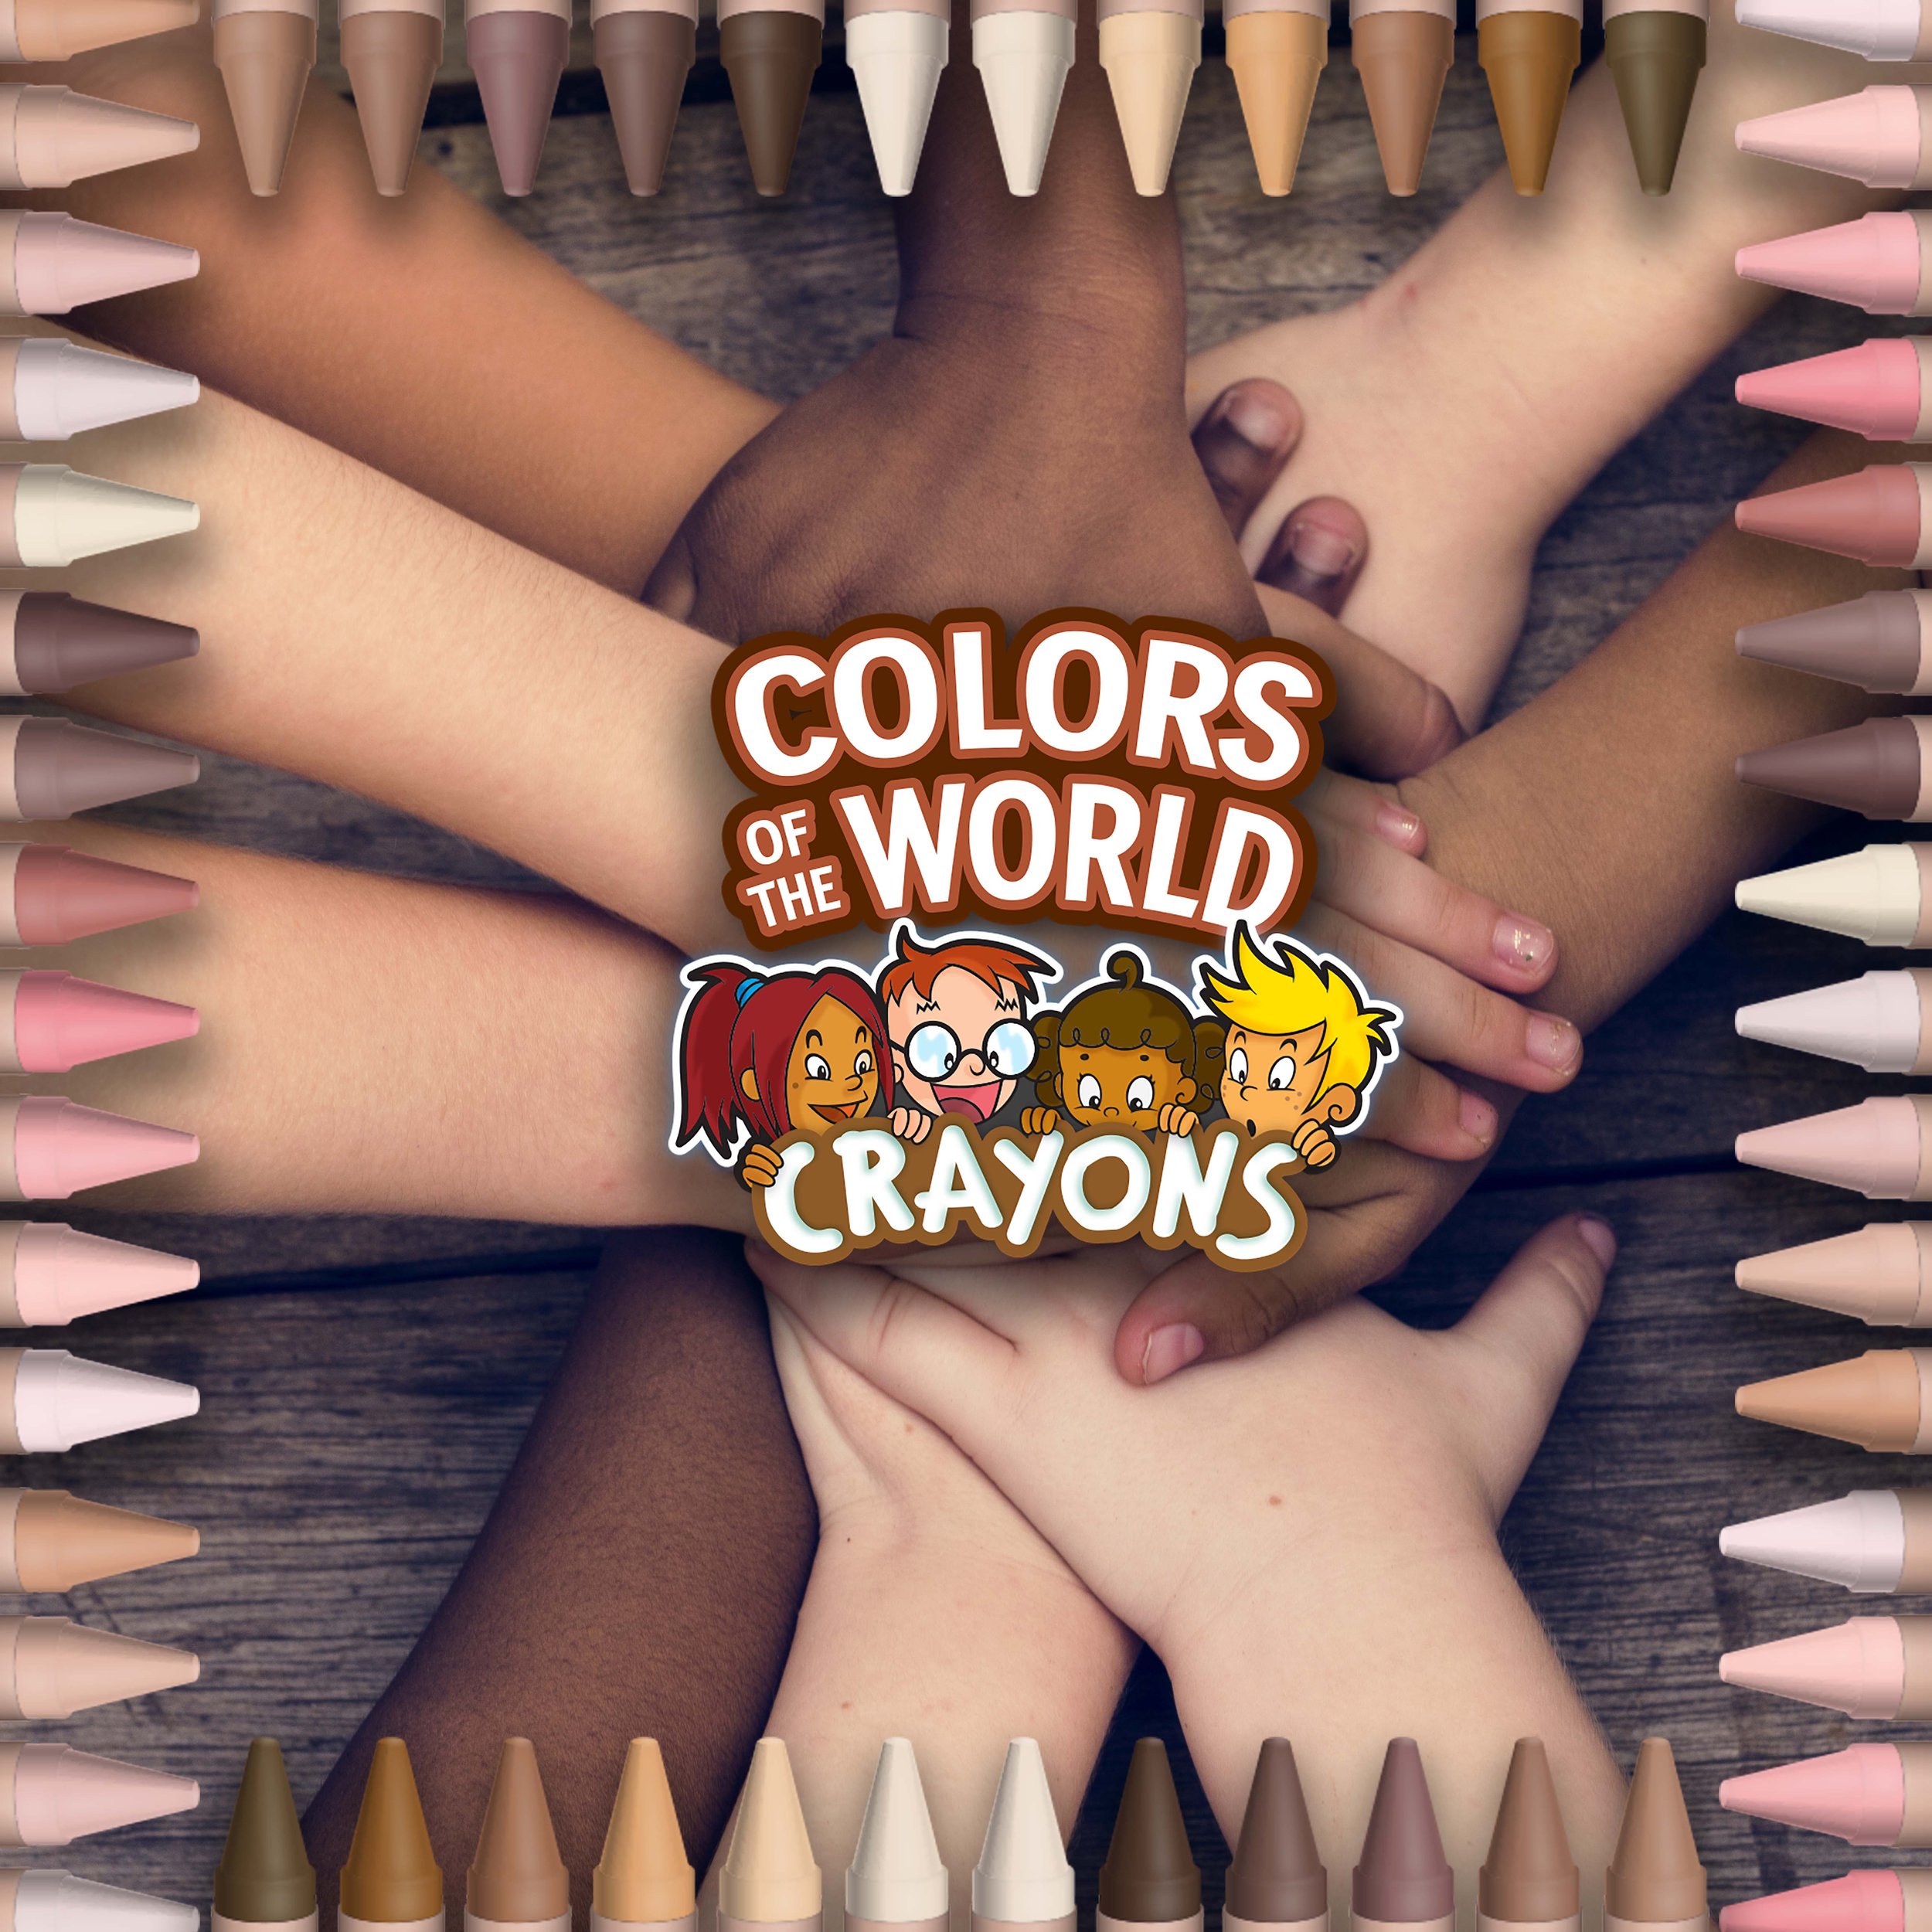 52-0108_24ct Crayons_Colors_of_the_World_04.jpg